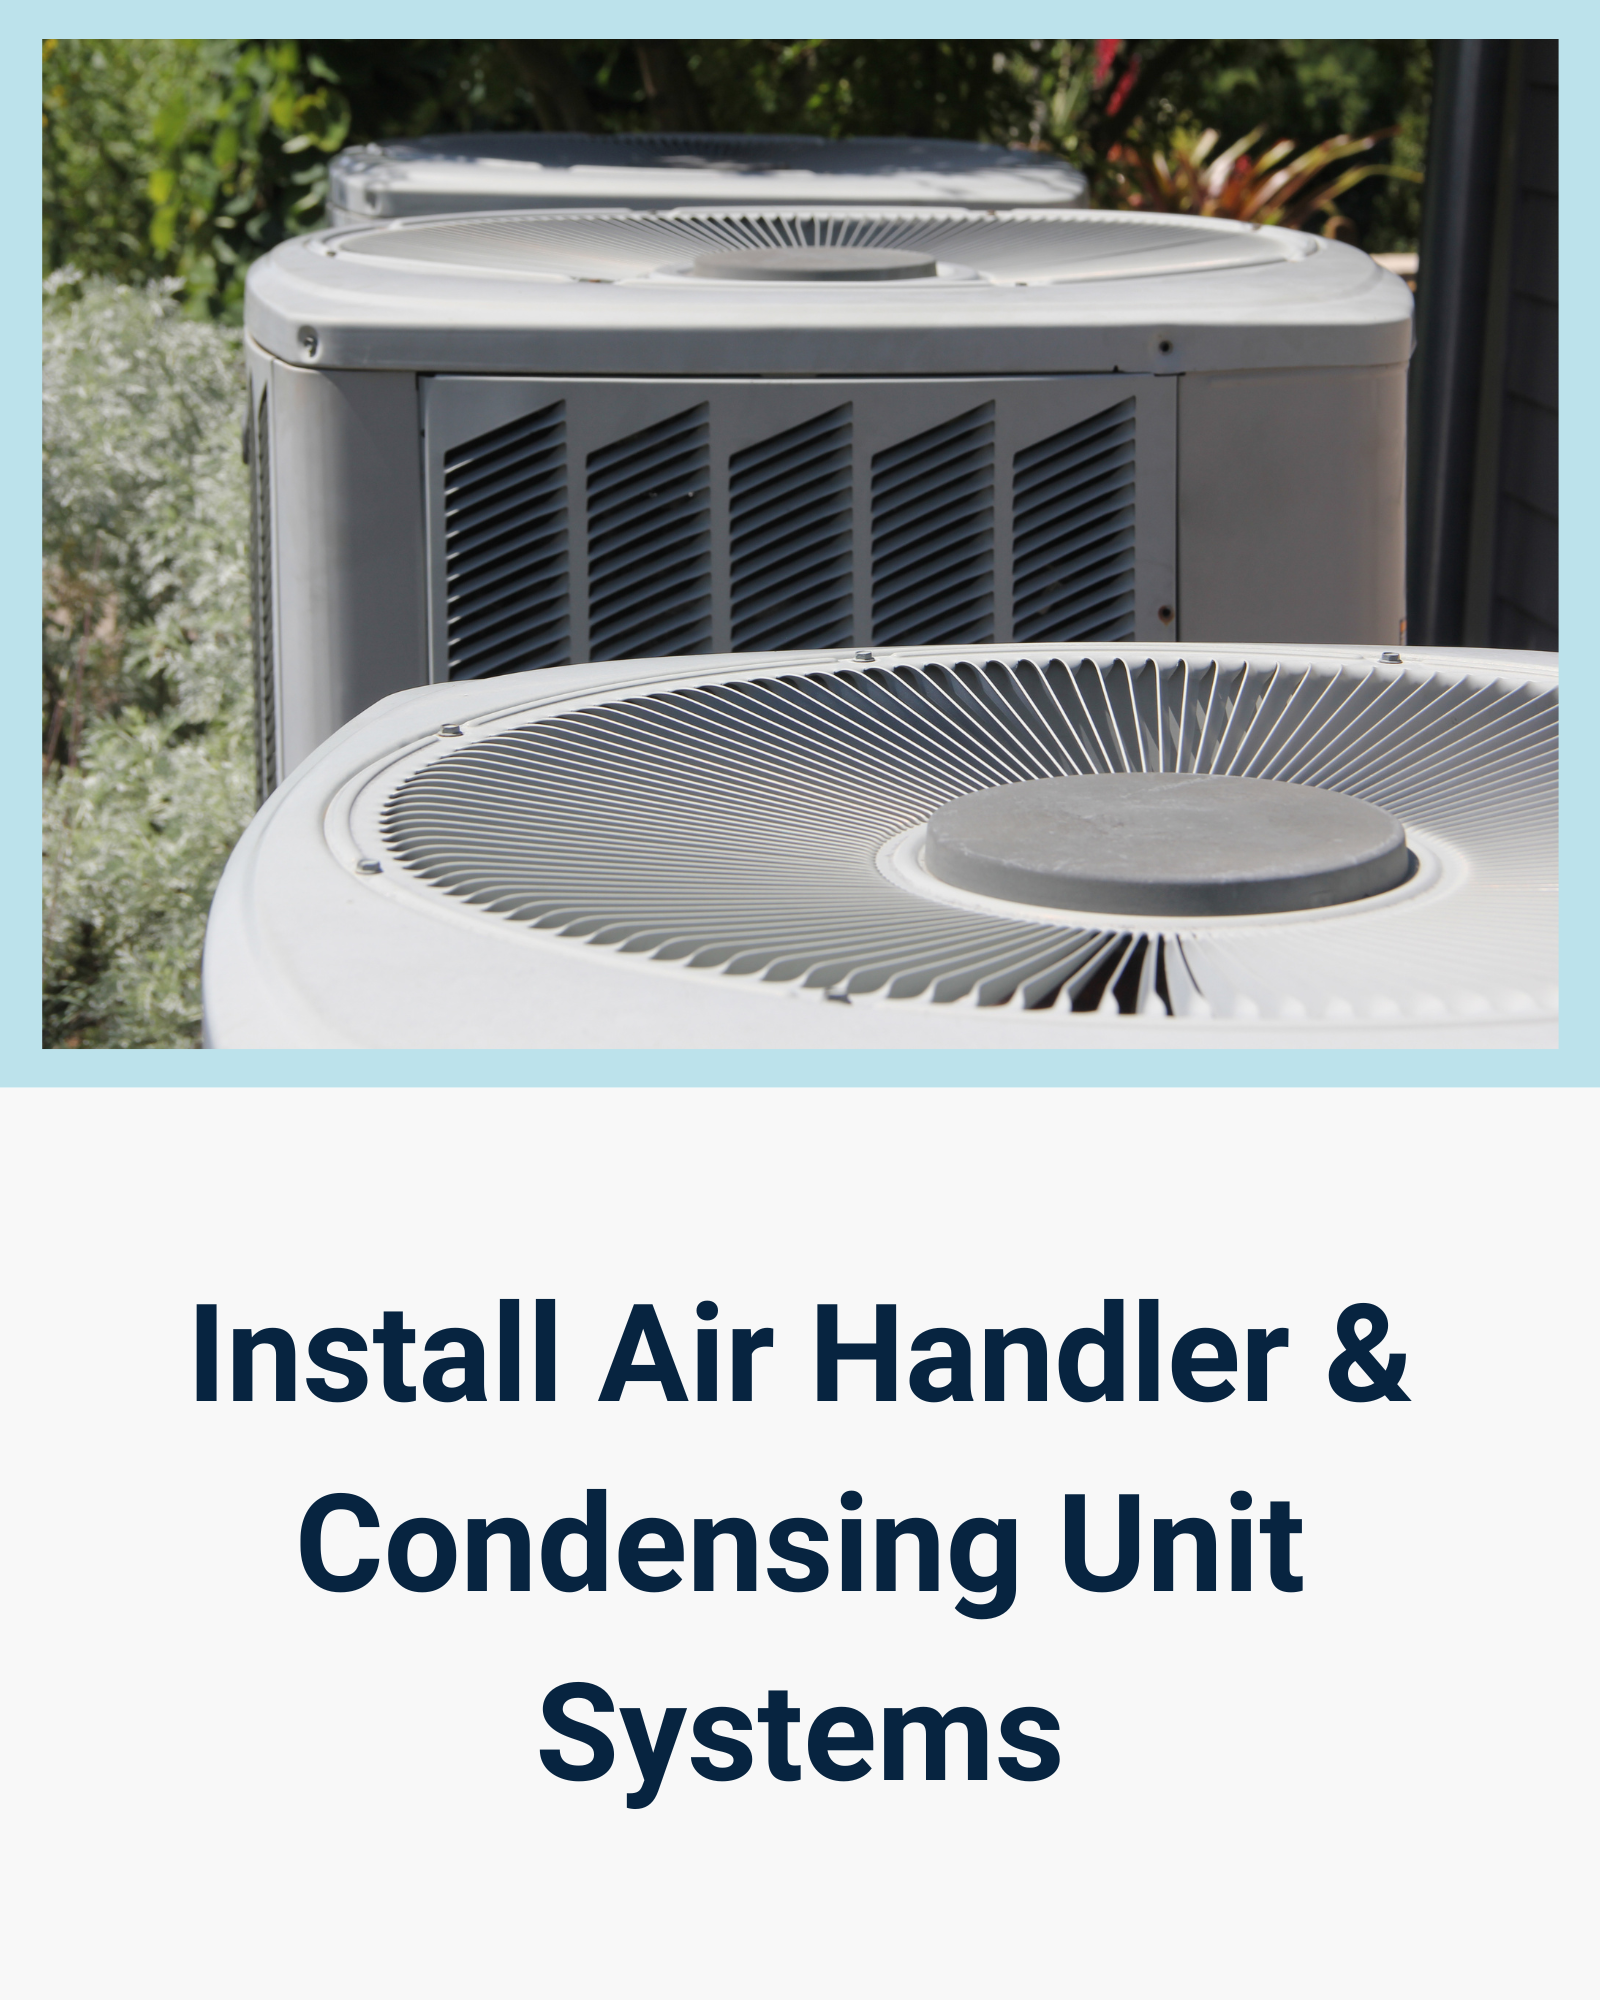 Install Air Handler & Condensing Unit Systems